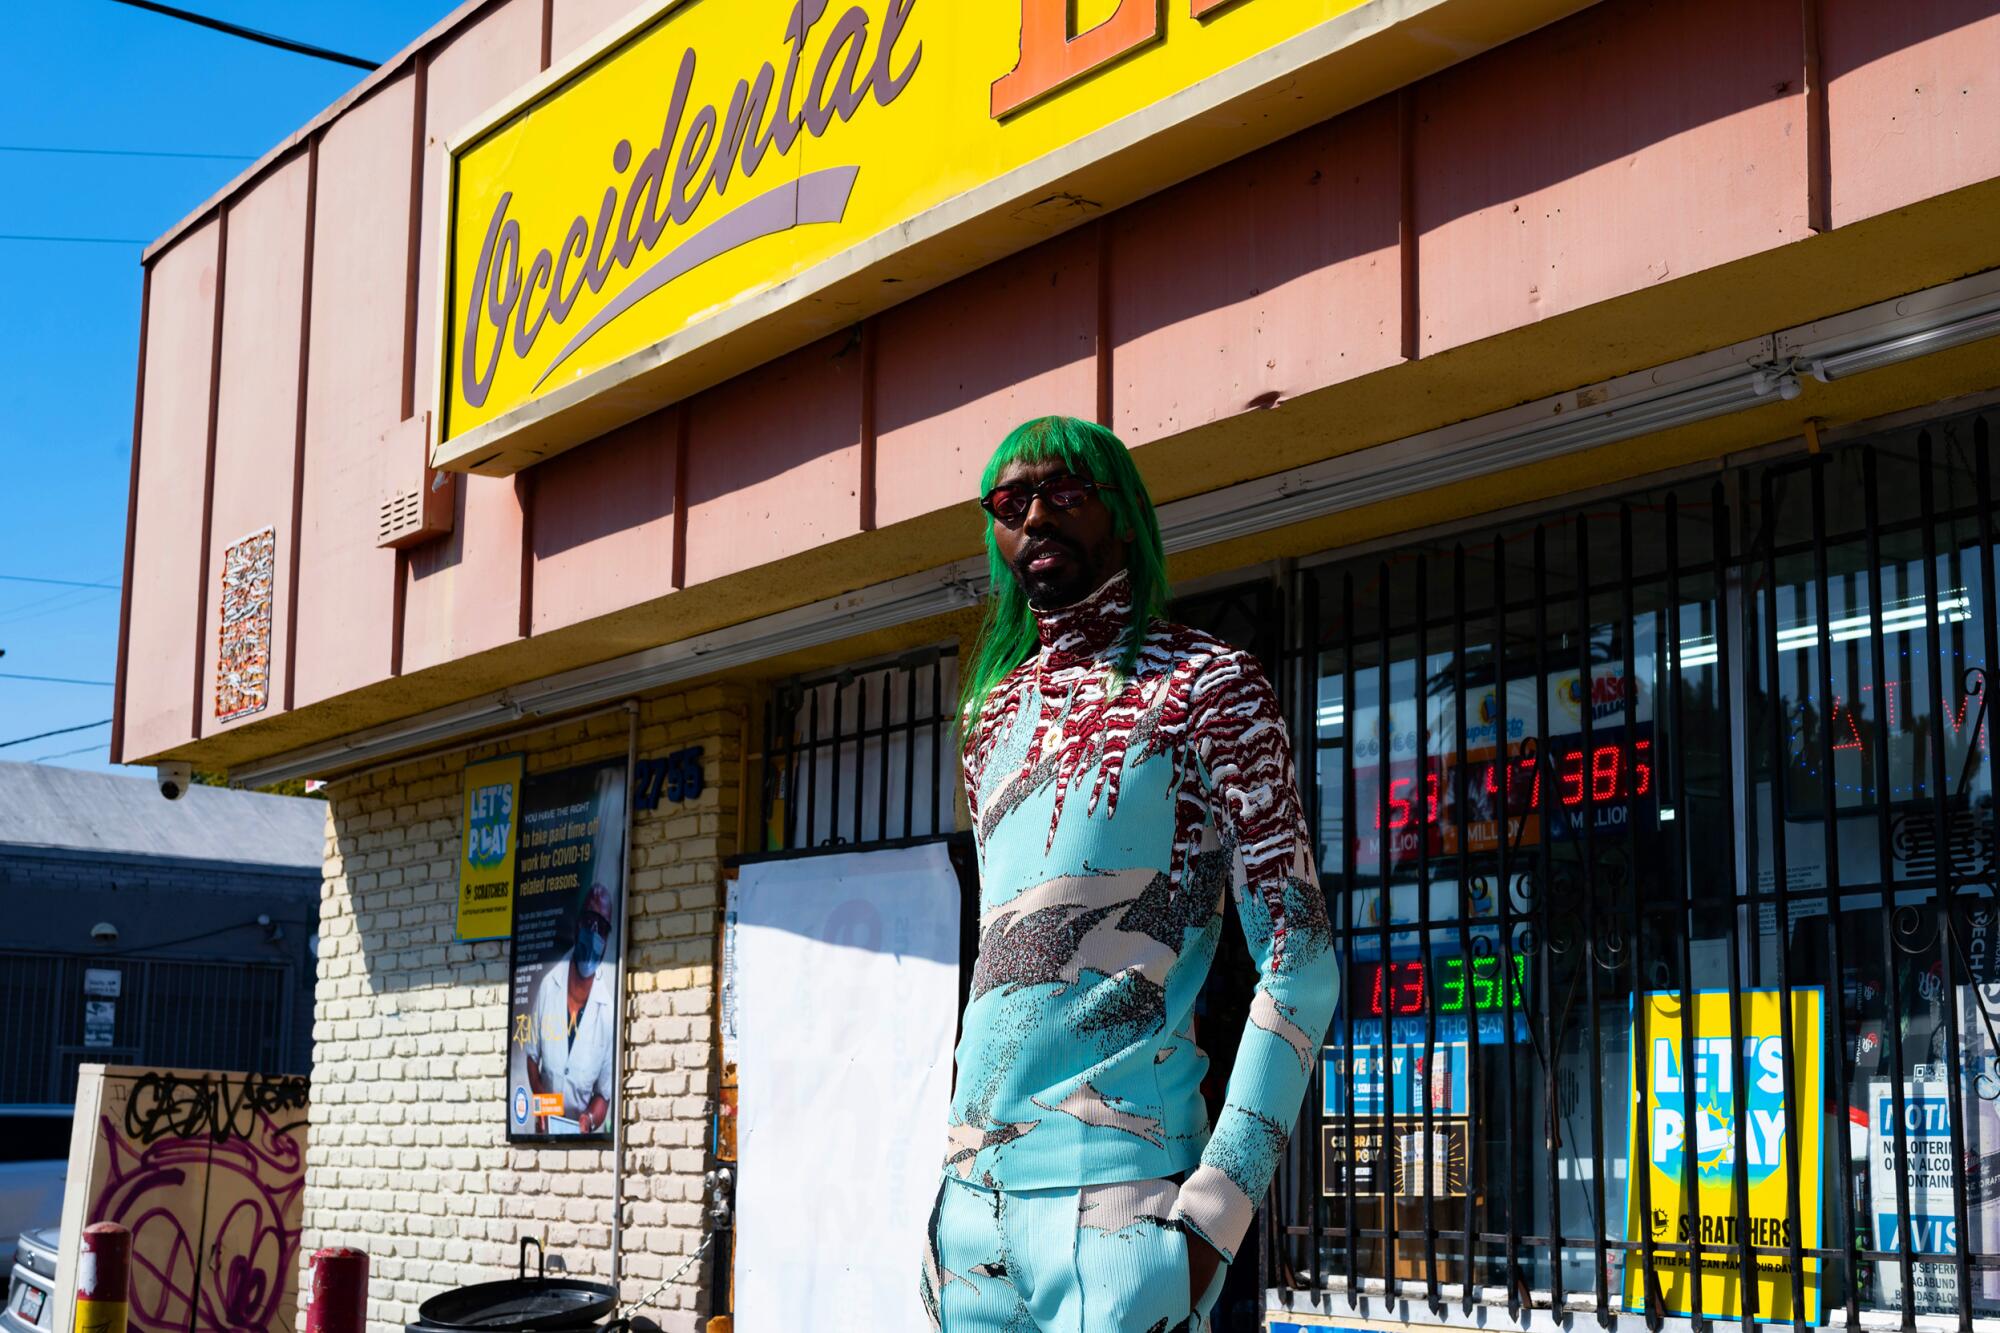 A person in sunglasses and green hair stands in front of a liquor store in a strip mall.